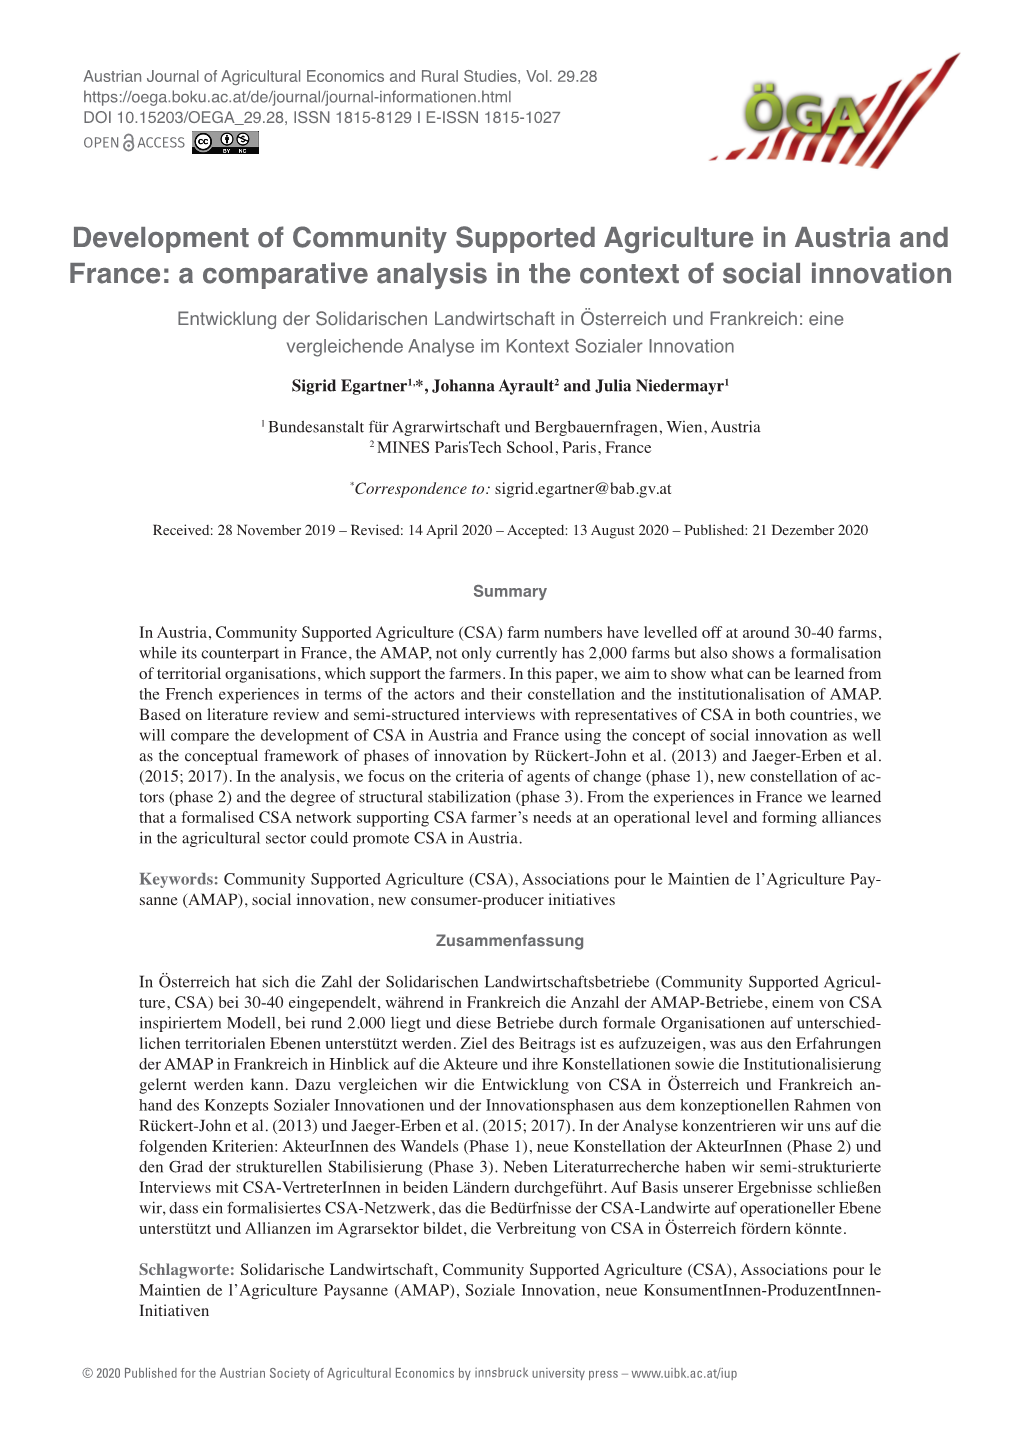 Development of Community Supported Agriculture in Austria